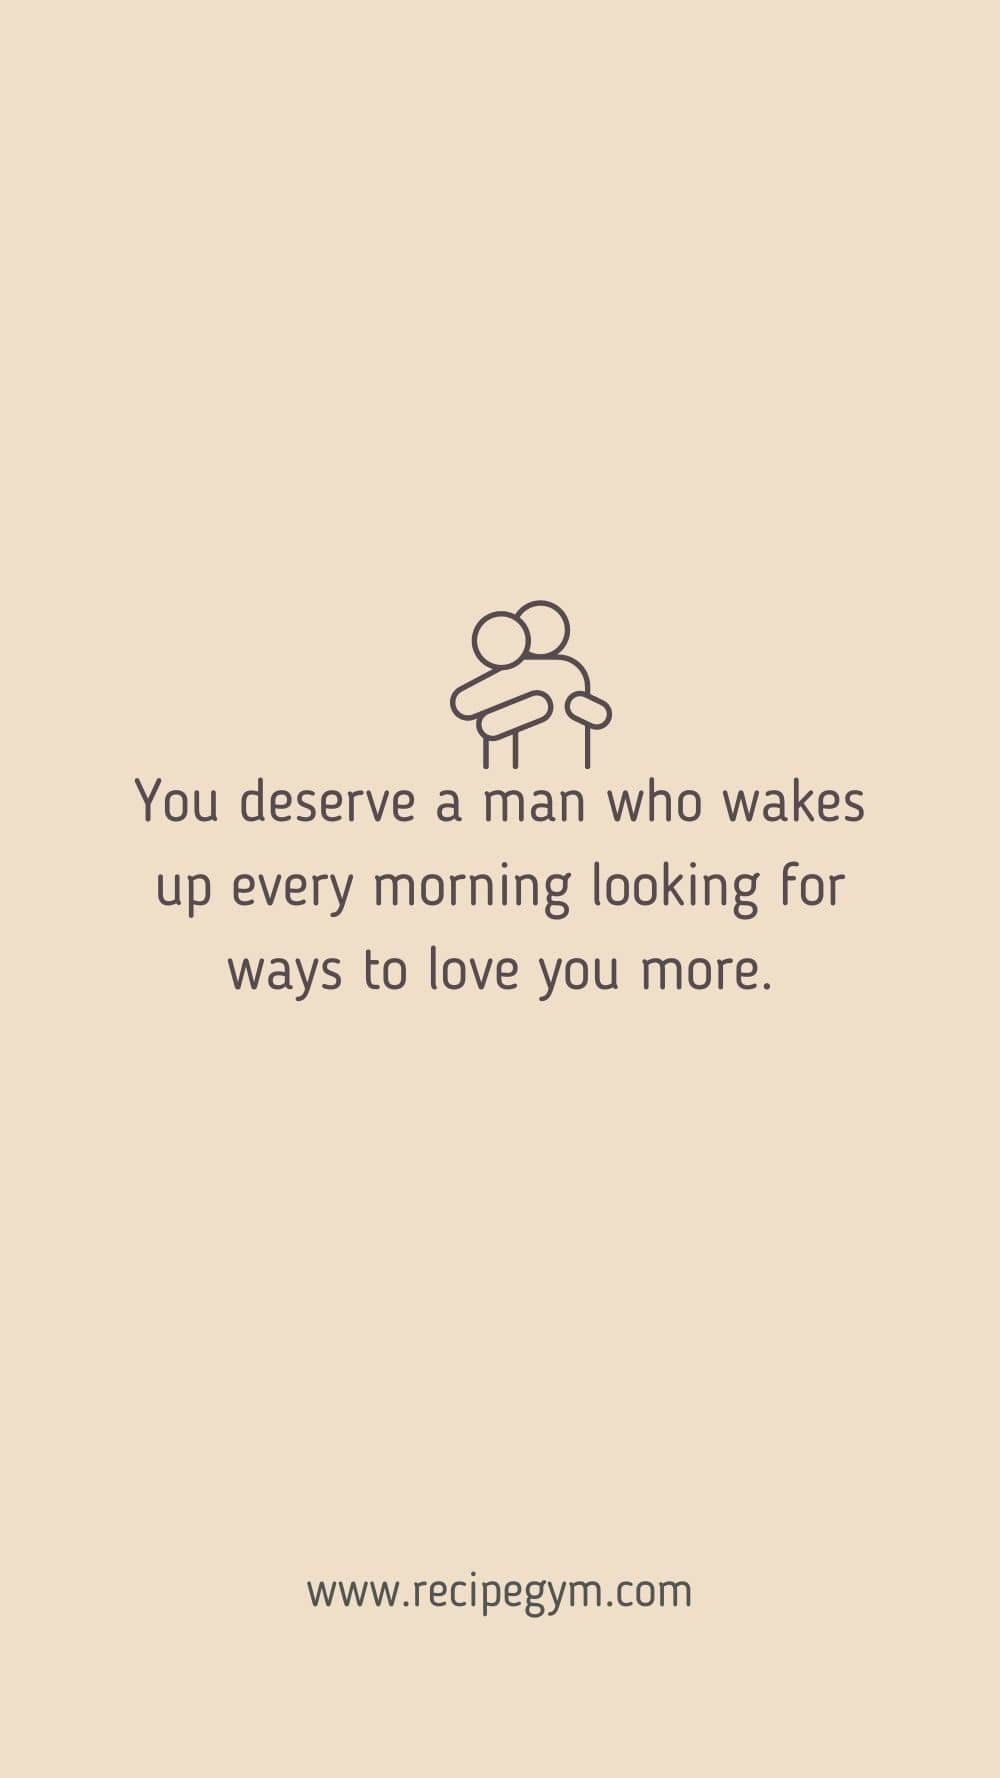 You deserve a man who wakes up every morning looking for ways to love you more